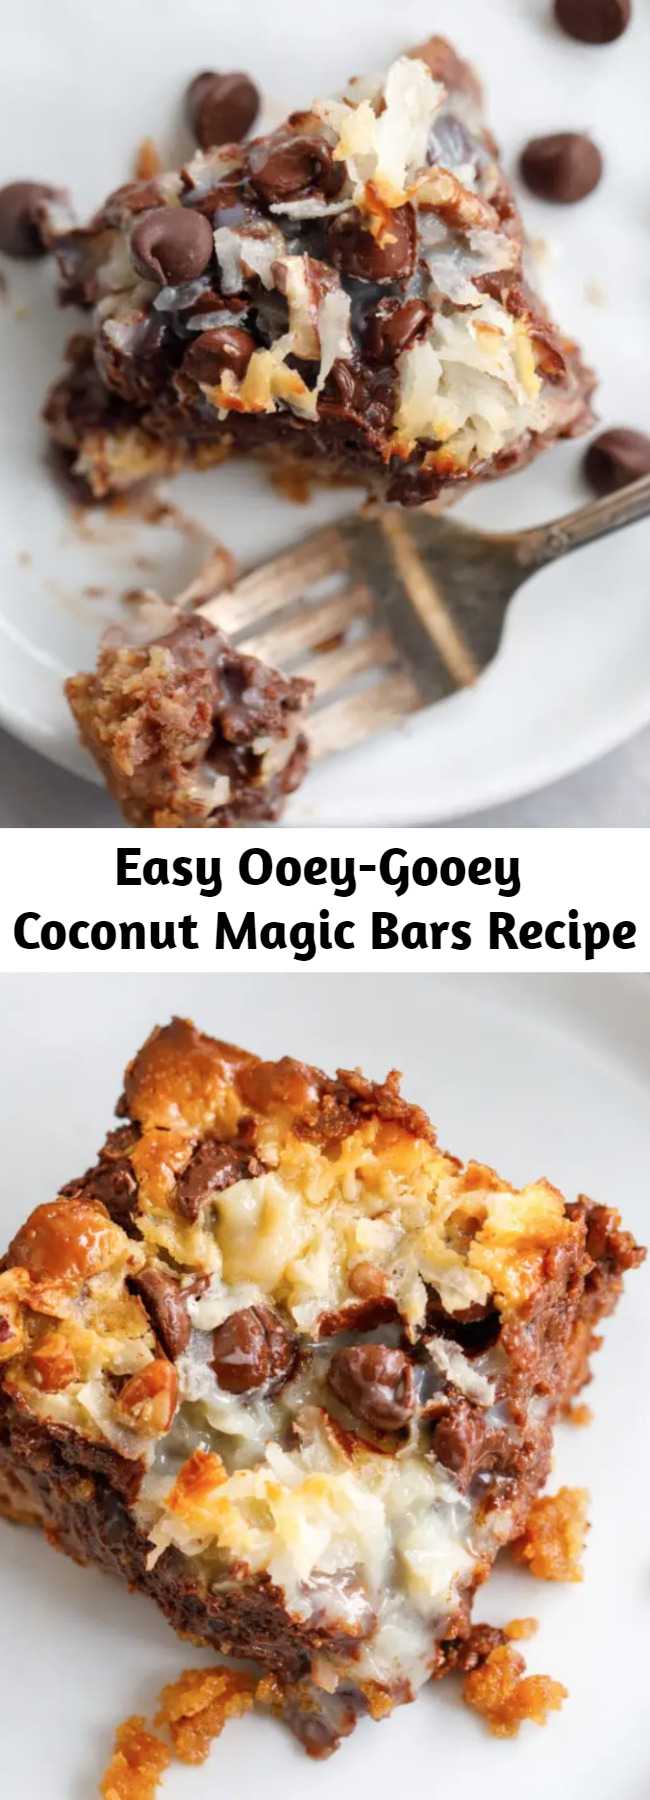 Easy Ooey-Gooey Coconut Magic Bars Recipe - These coconut magic bars are so easy to make that it’s almost funny. It doesn’t seem like something so TASTY could result from layering a few ingredients in a baking dish. Y’all, these coconut magic bars are like HEAVEN. These ooey-gooey coconut magic cookie bars are my favorite dessert EVER! #Dessert #Coconut #Bars